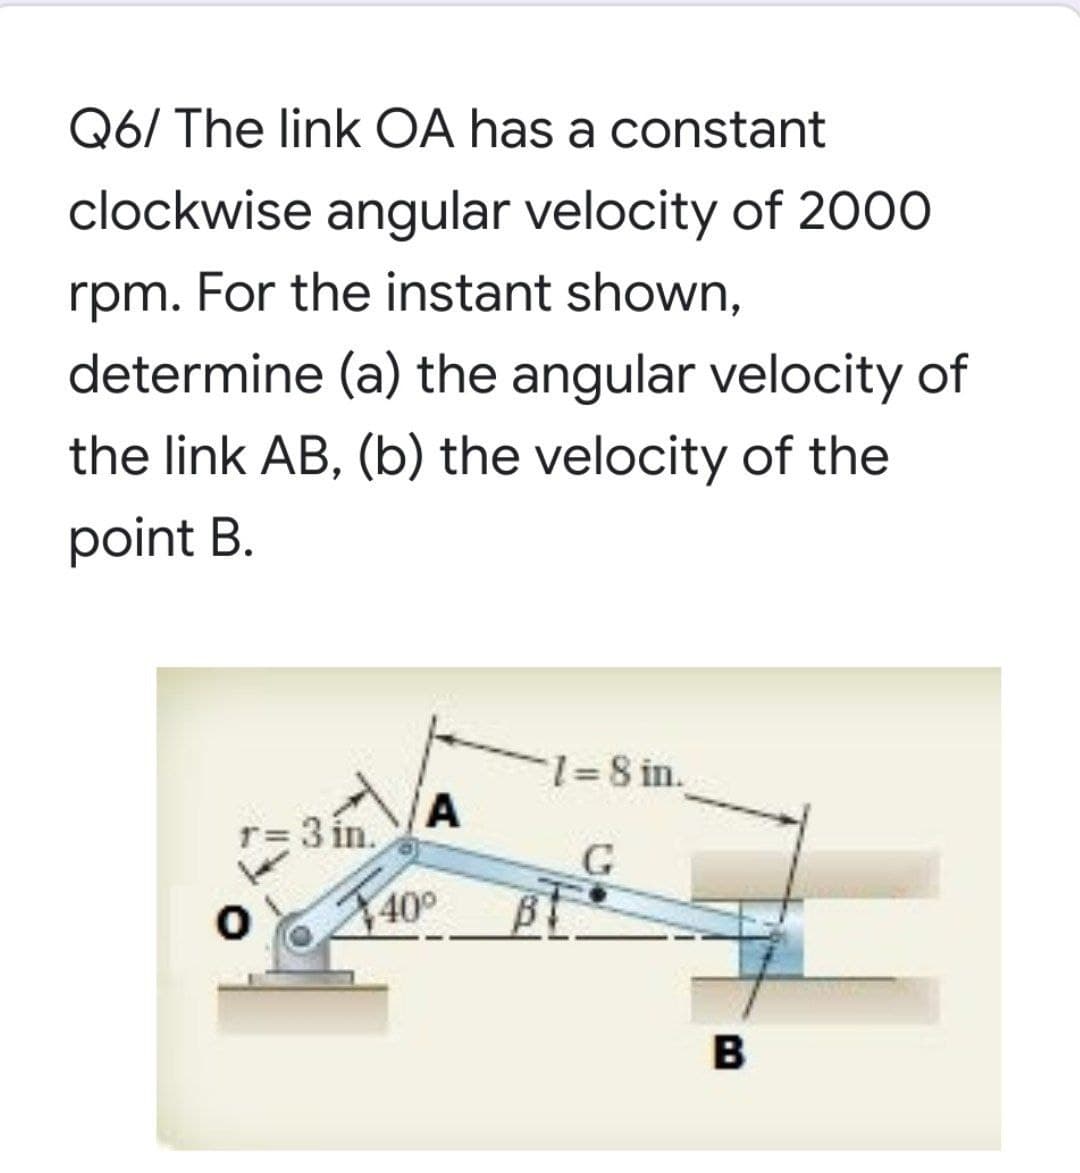 Q6/ The link OA has a constant
clockwise angular velocity of 2000
rpm.
For the instant shown,
determine (a) the angular velocity of
the link AB, (b) the velocity of the
point B.
1%=8 in.
A
=3 in.
40°
B
